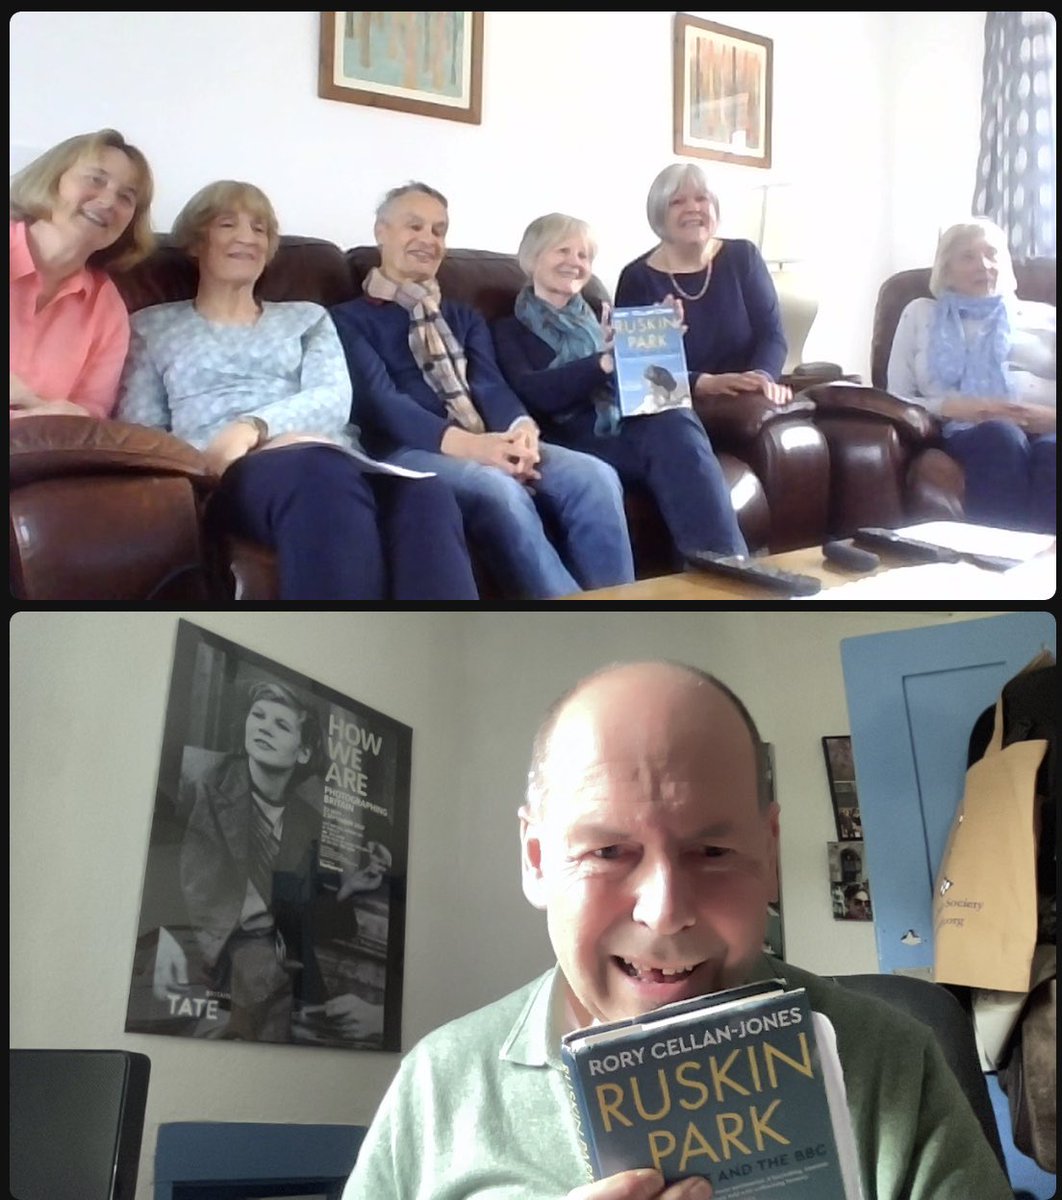 Third #RuskinPark book club Zoom of the week - and the folks from Evesham asked some great questions